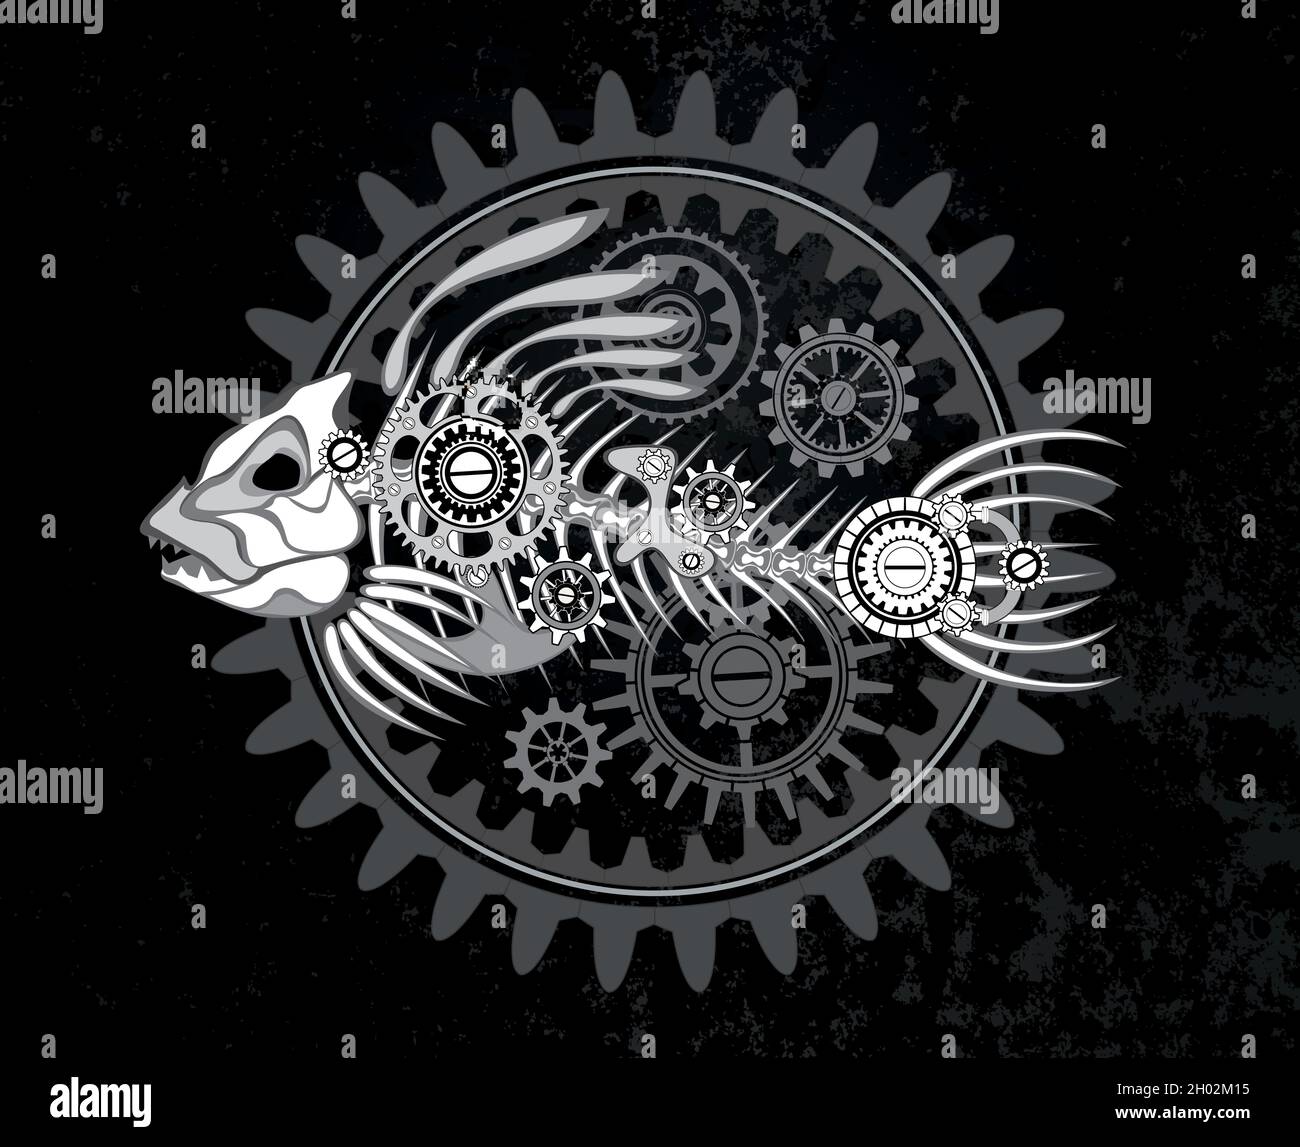 Contour, white, mechanical skeleton of fish with mechanism of silhouette gears on dark grunge background. Steampunk style. Stock Vector